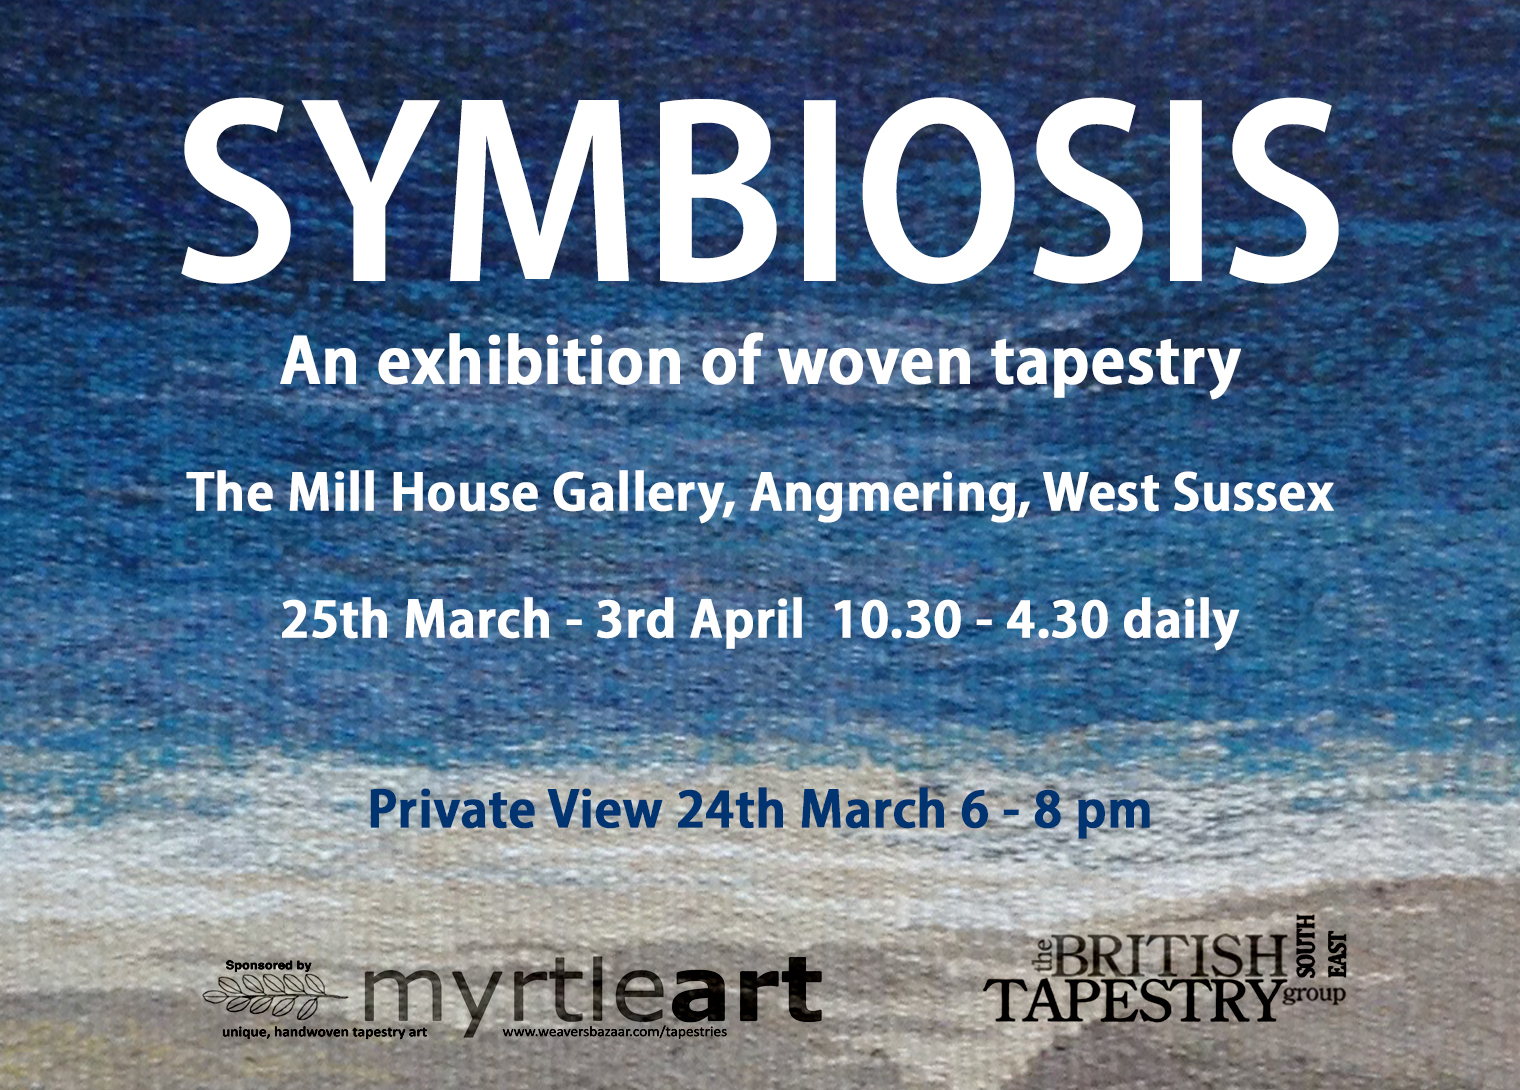 Symbiosis moves to Hastings Arts Forum from 19th April to 1st May 2016